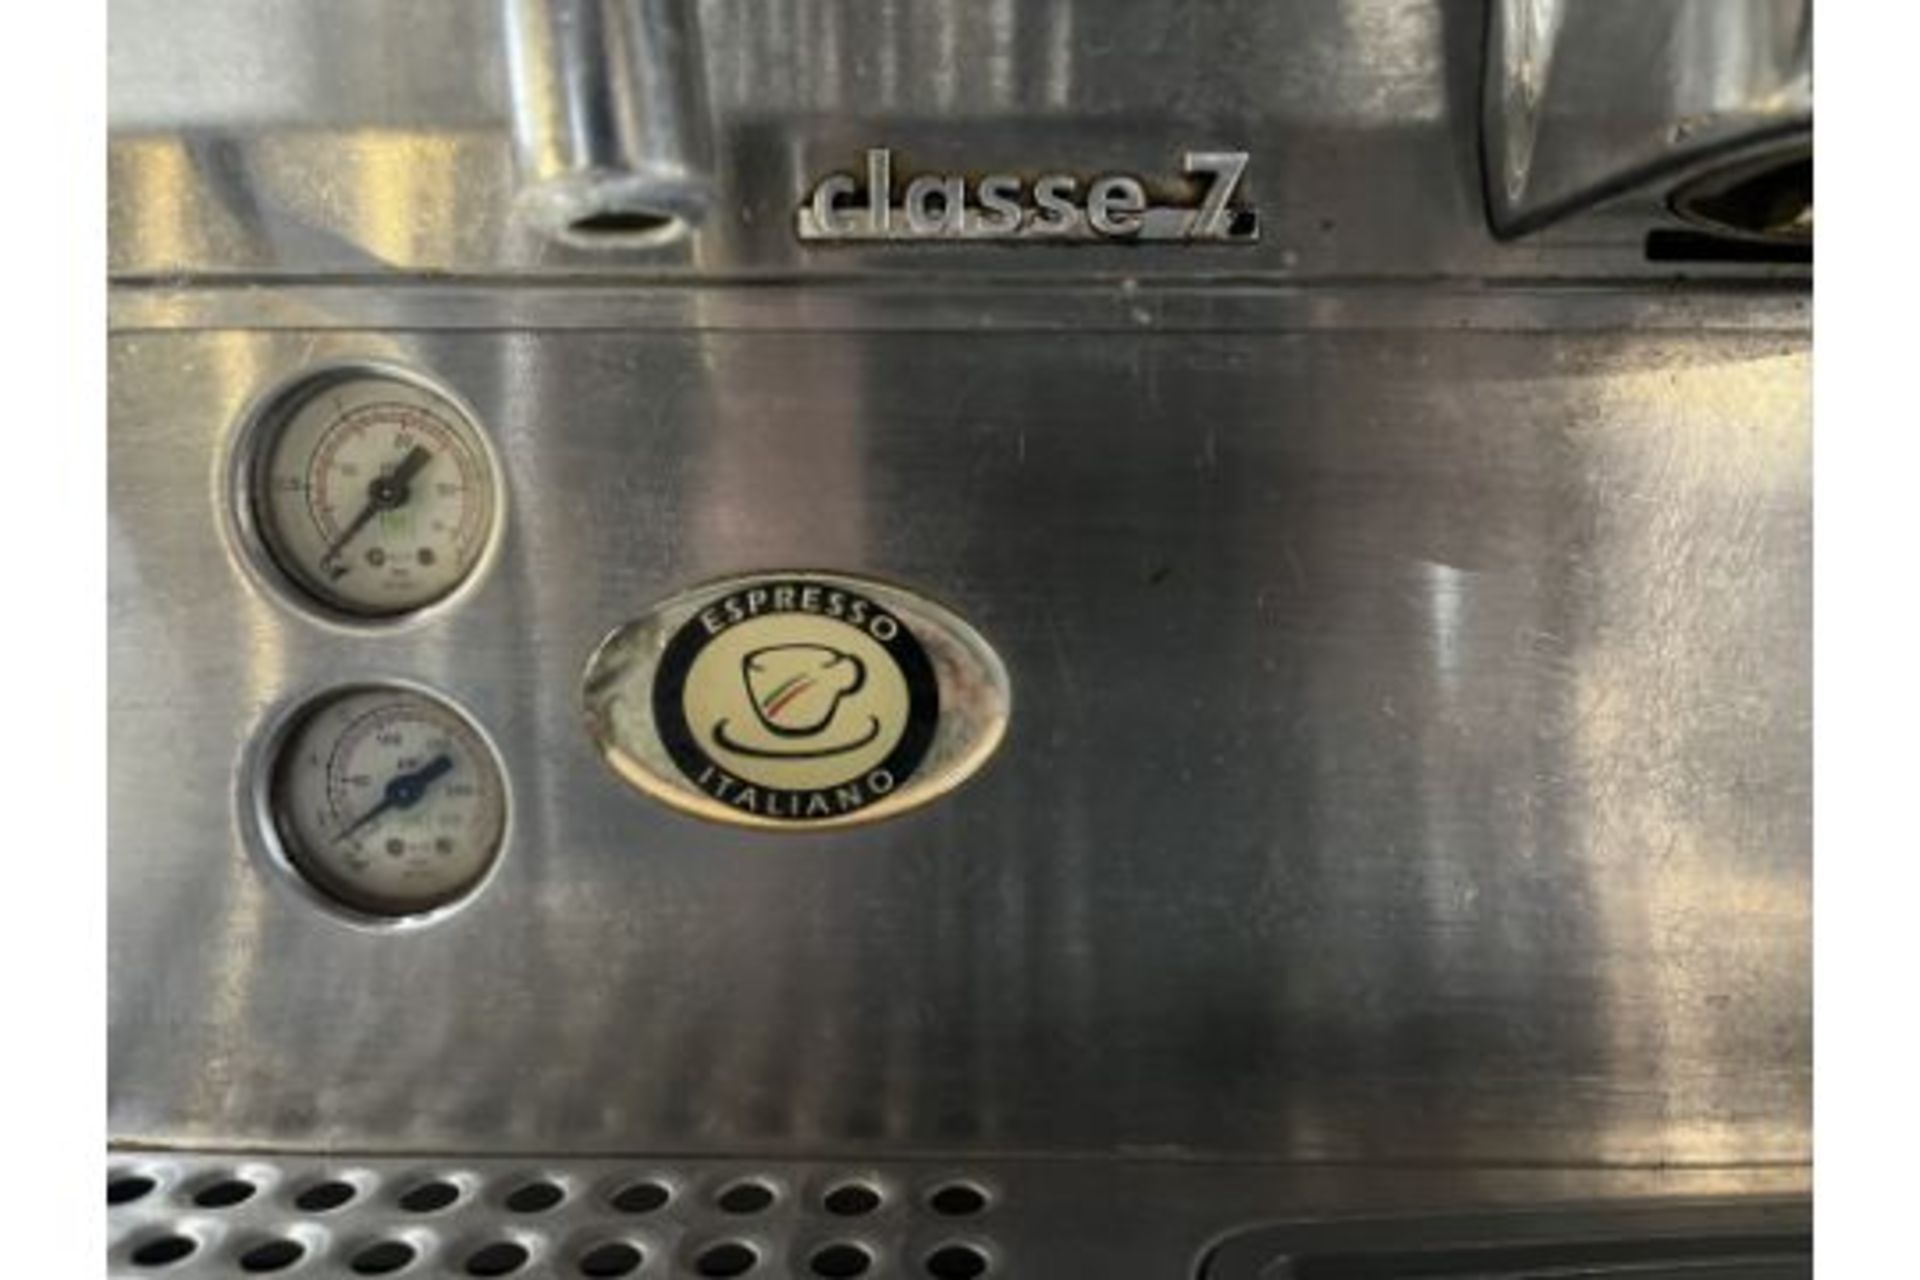 Rancilio Classe 7 Commercial Coffee Machine - Image 3 of 4